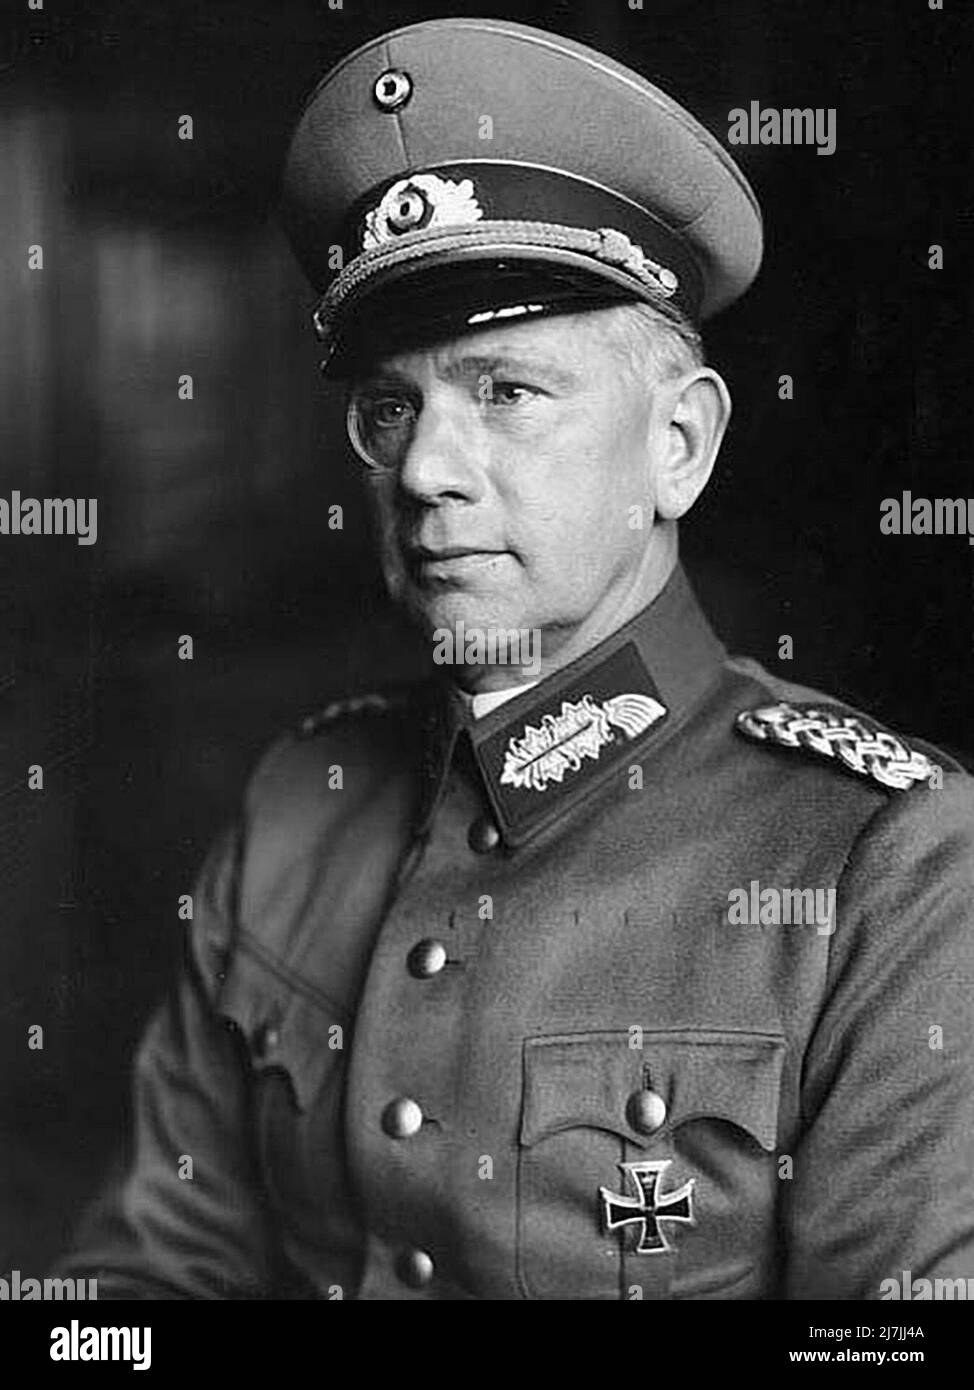 Wehrmacht leader Walter von Reichenau. During WW2 he commanded the 6thArmy in Europe and as part of Army Group South during Operation Barbarossa, the nazi invasion of the USSR Stock Photo